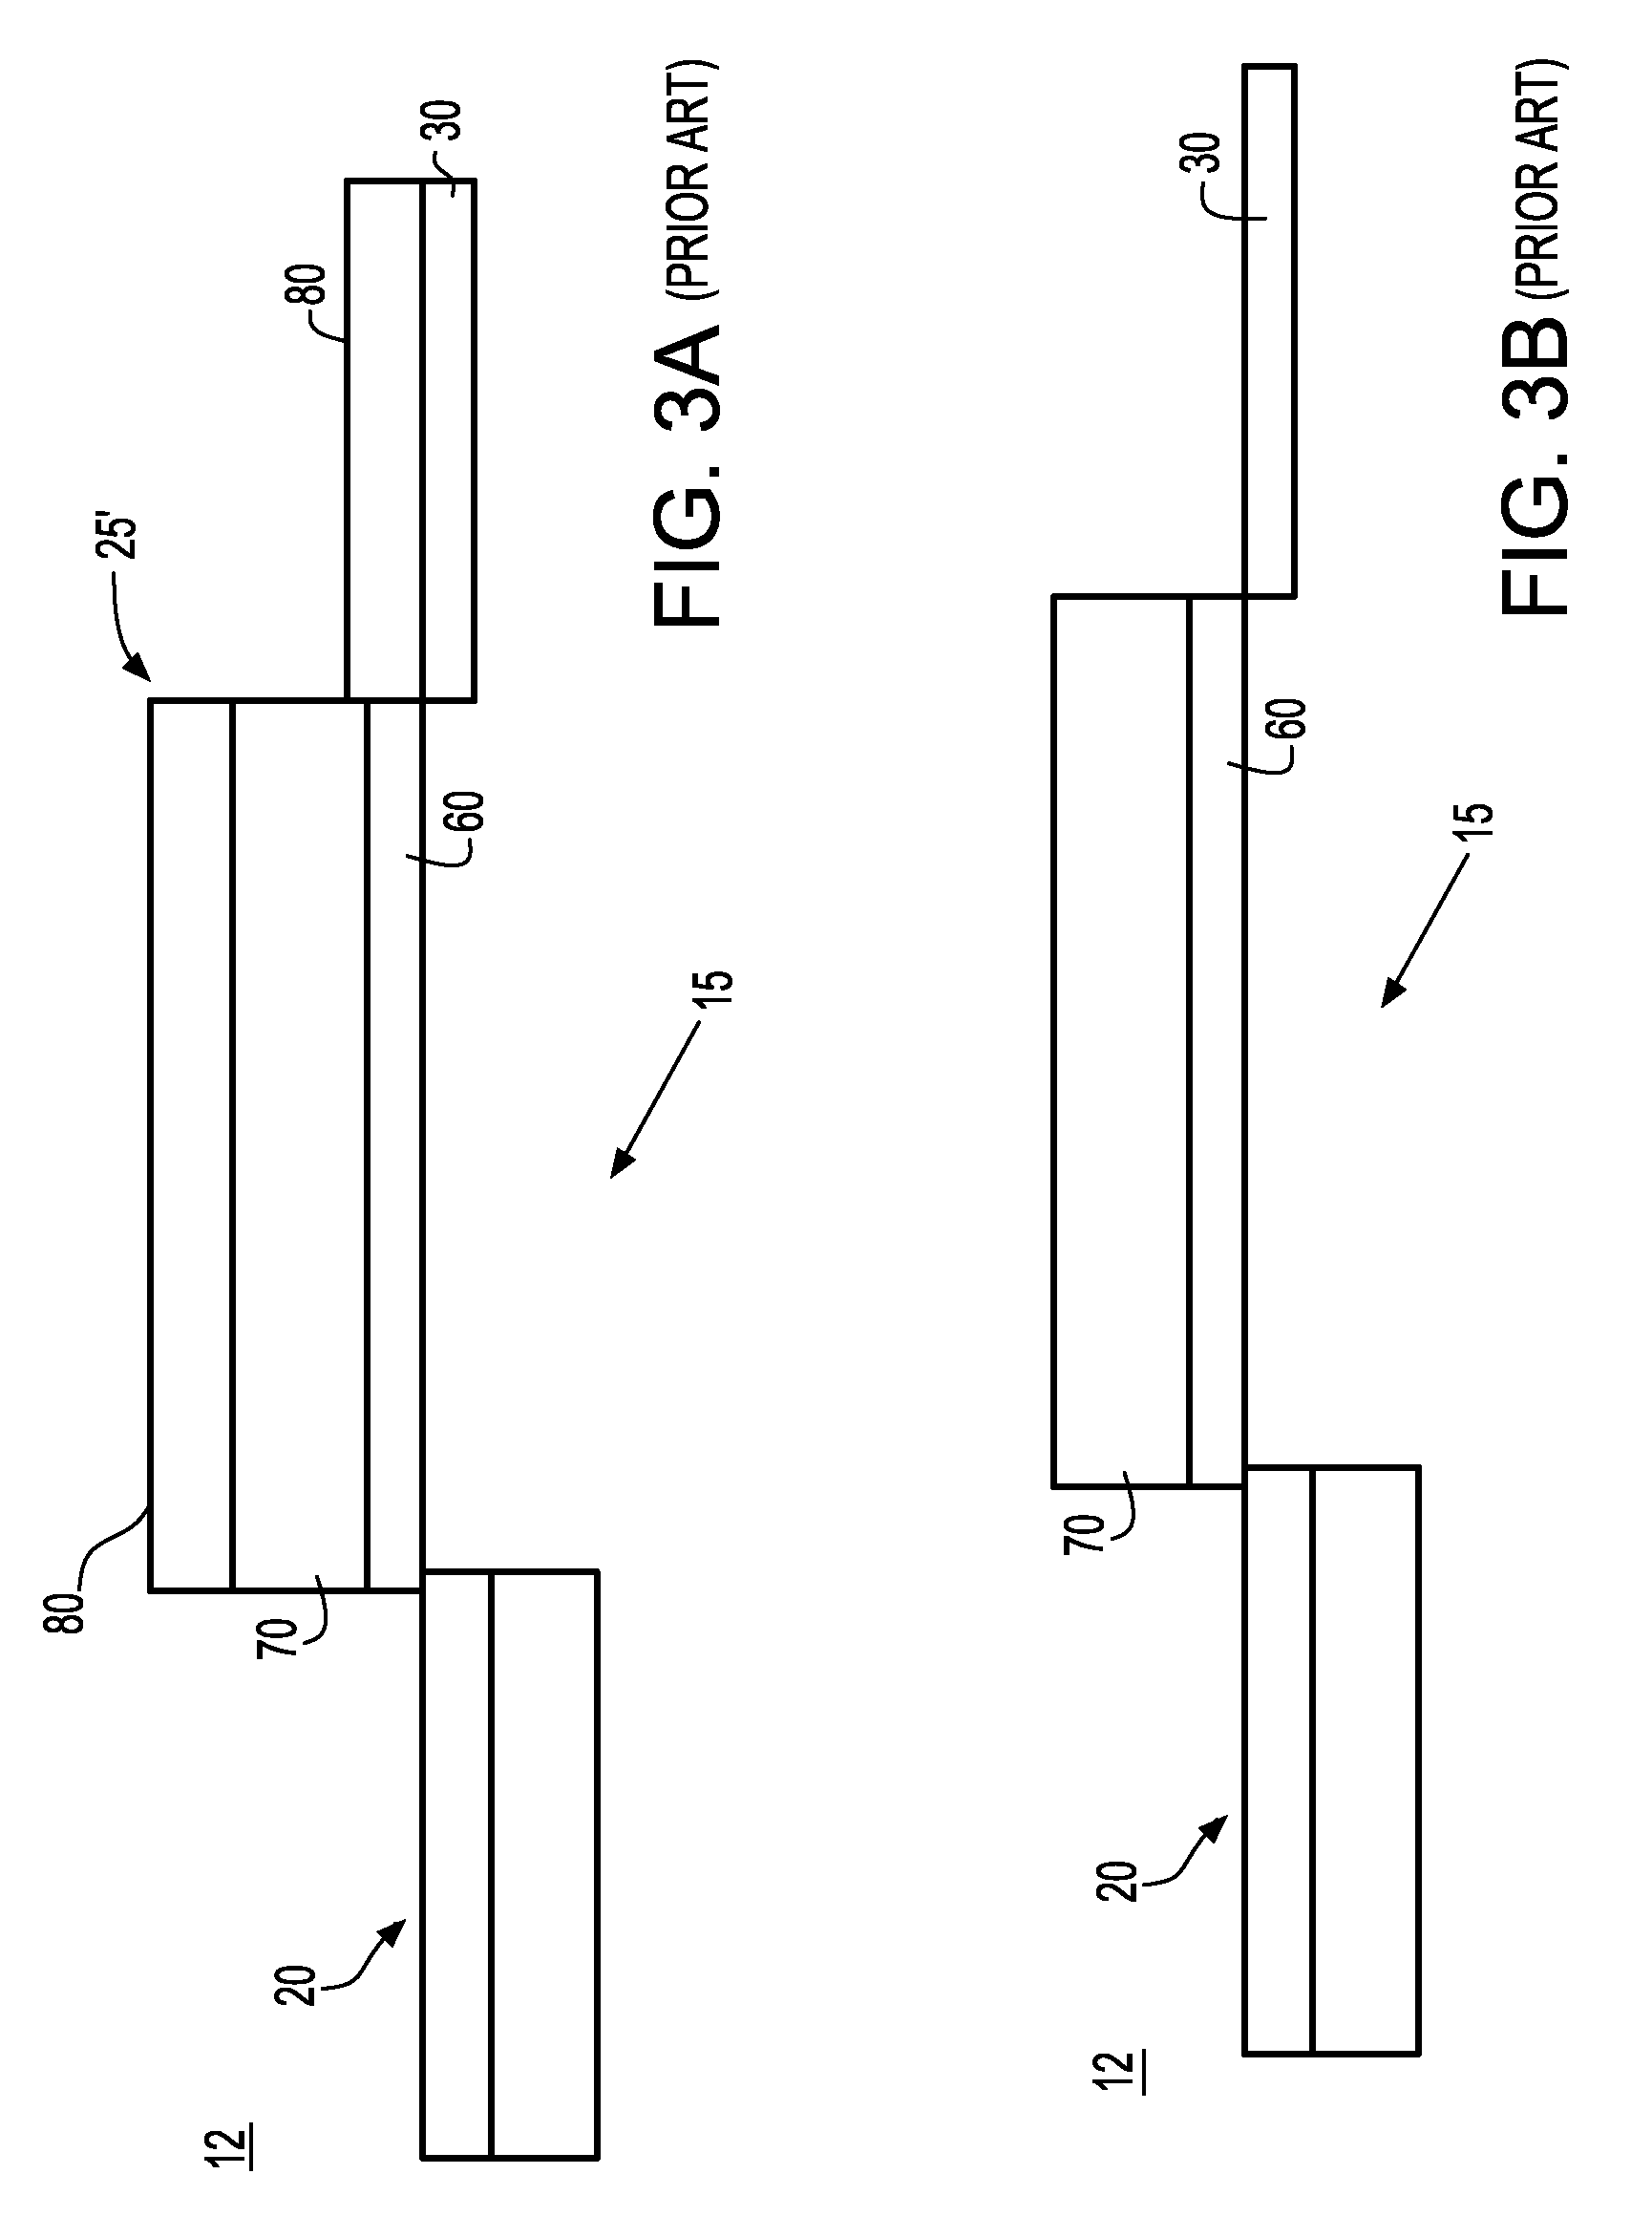 Silicide strapping in imager transfer gate device